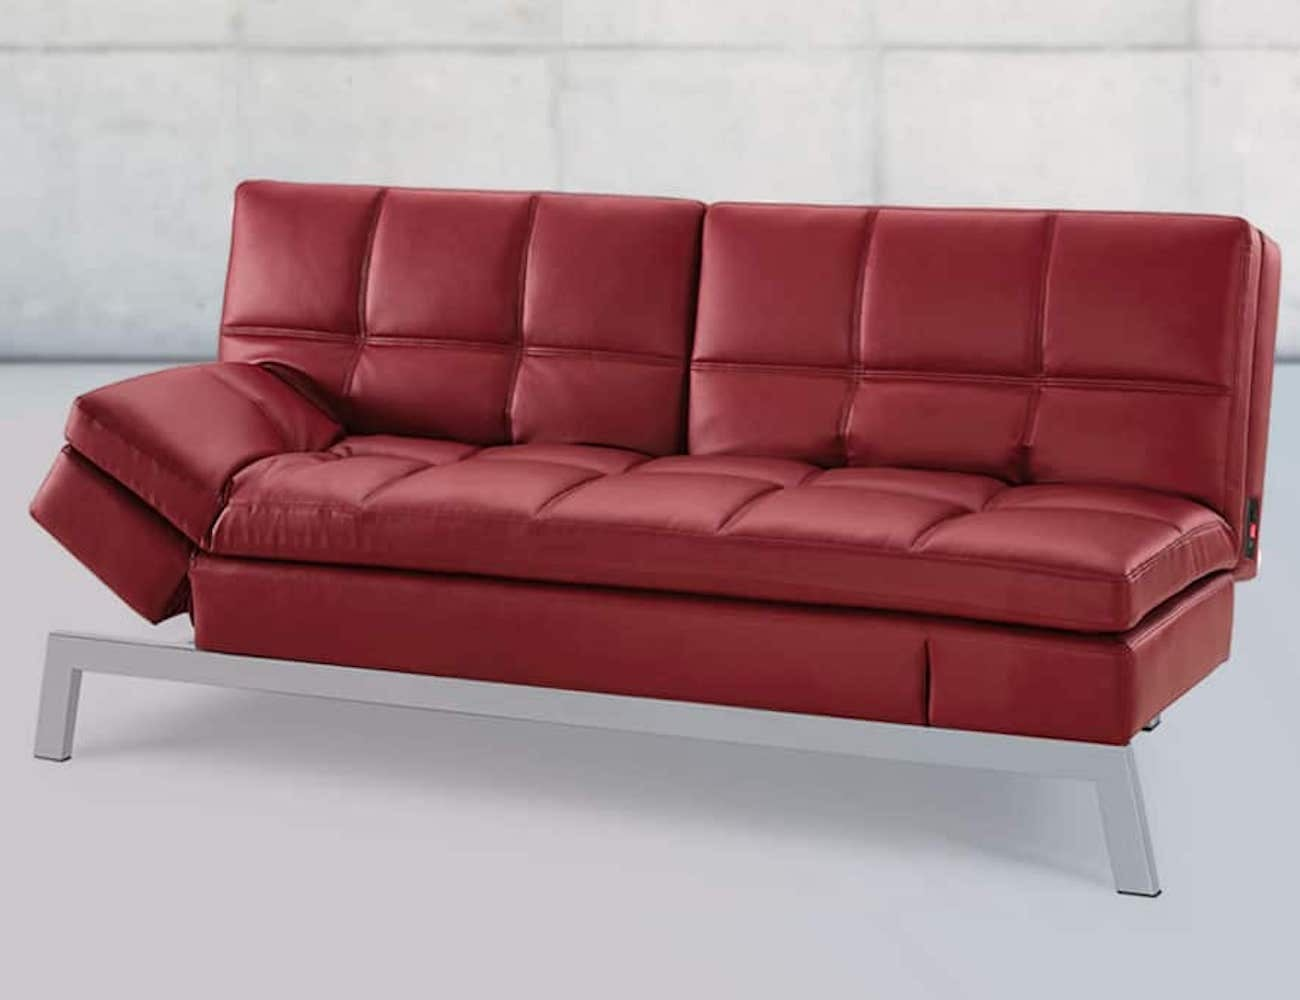 Coddle convertible couch 